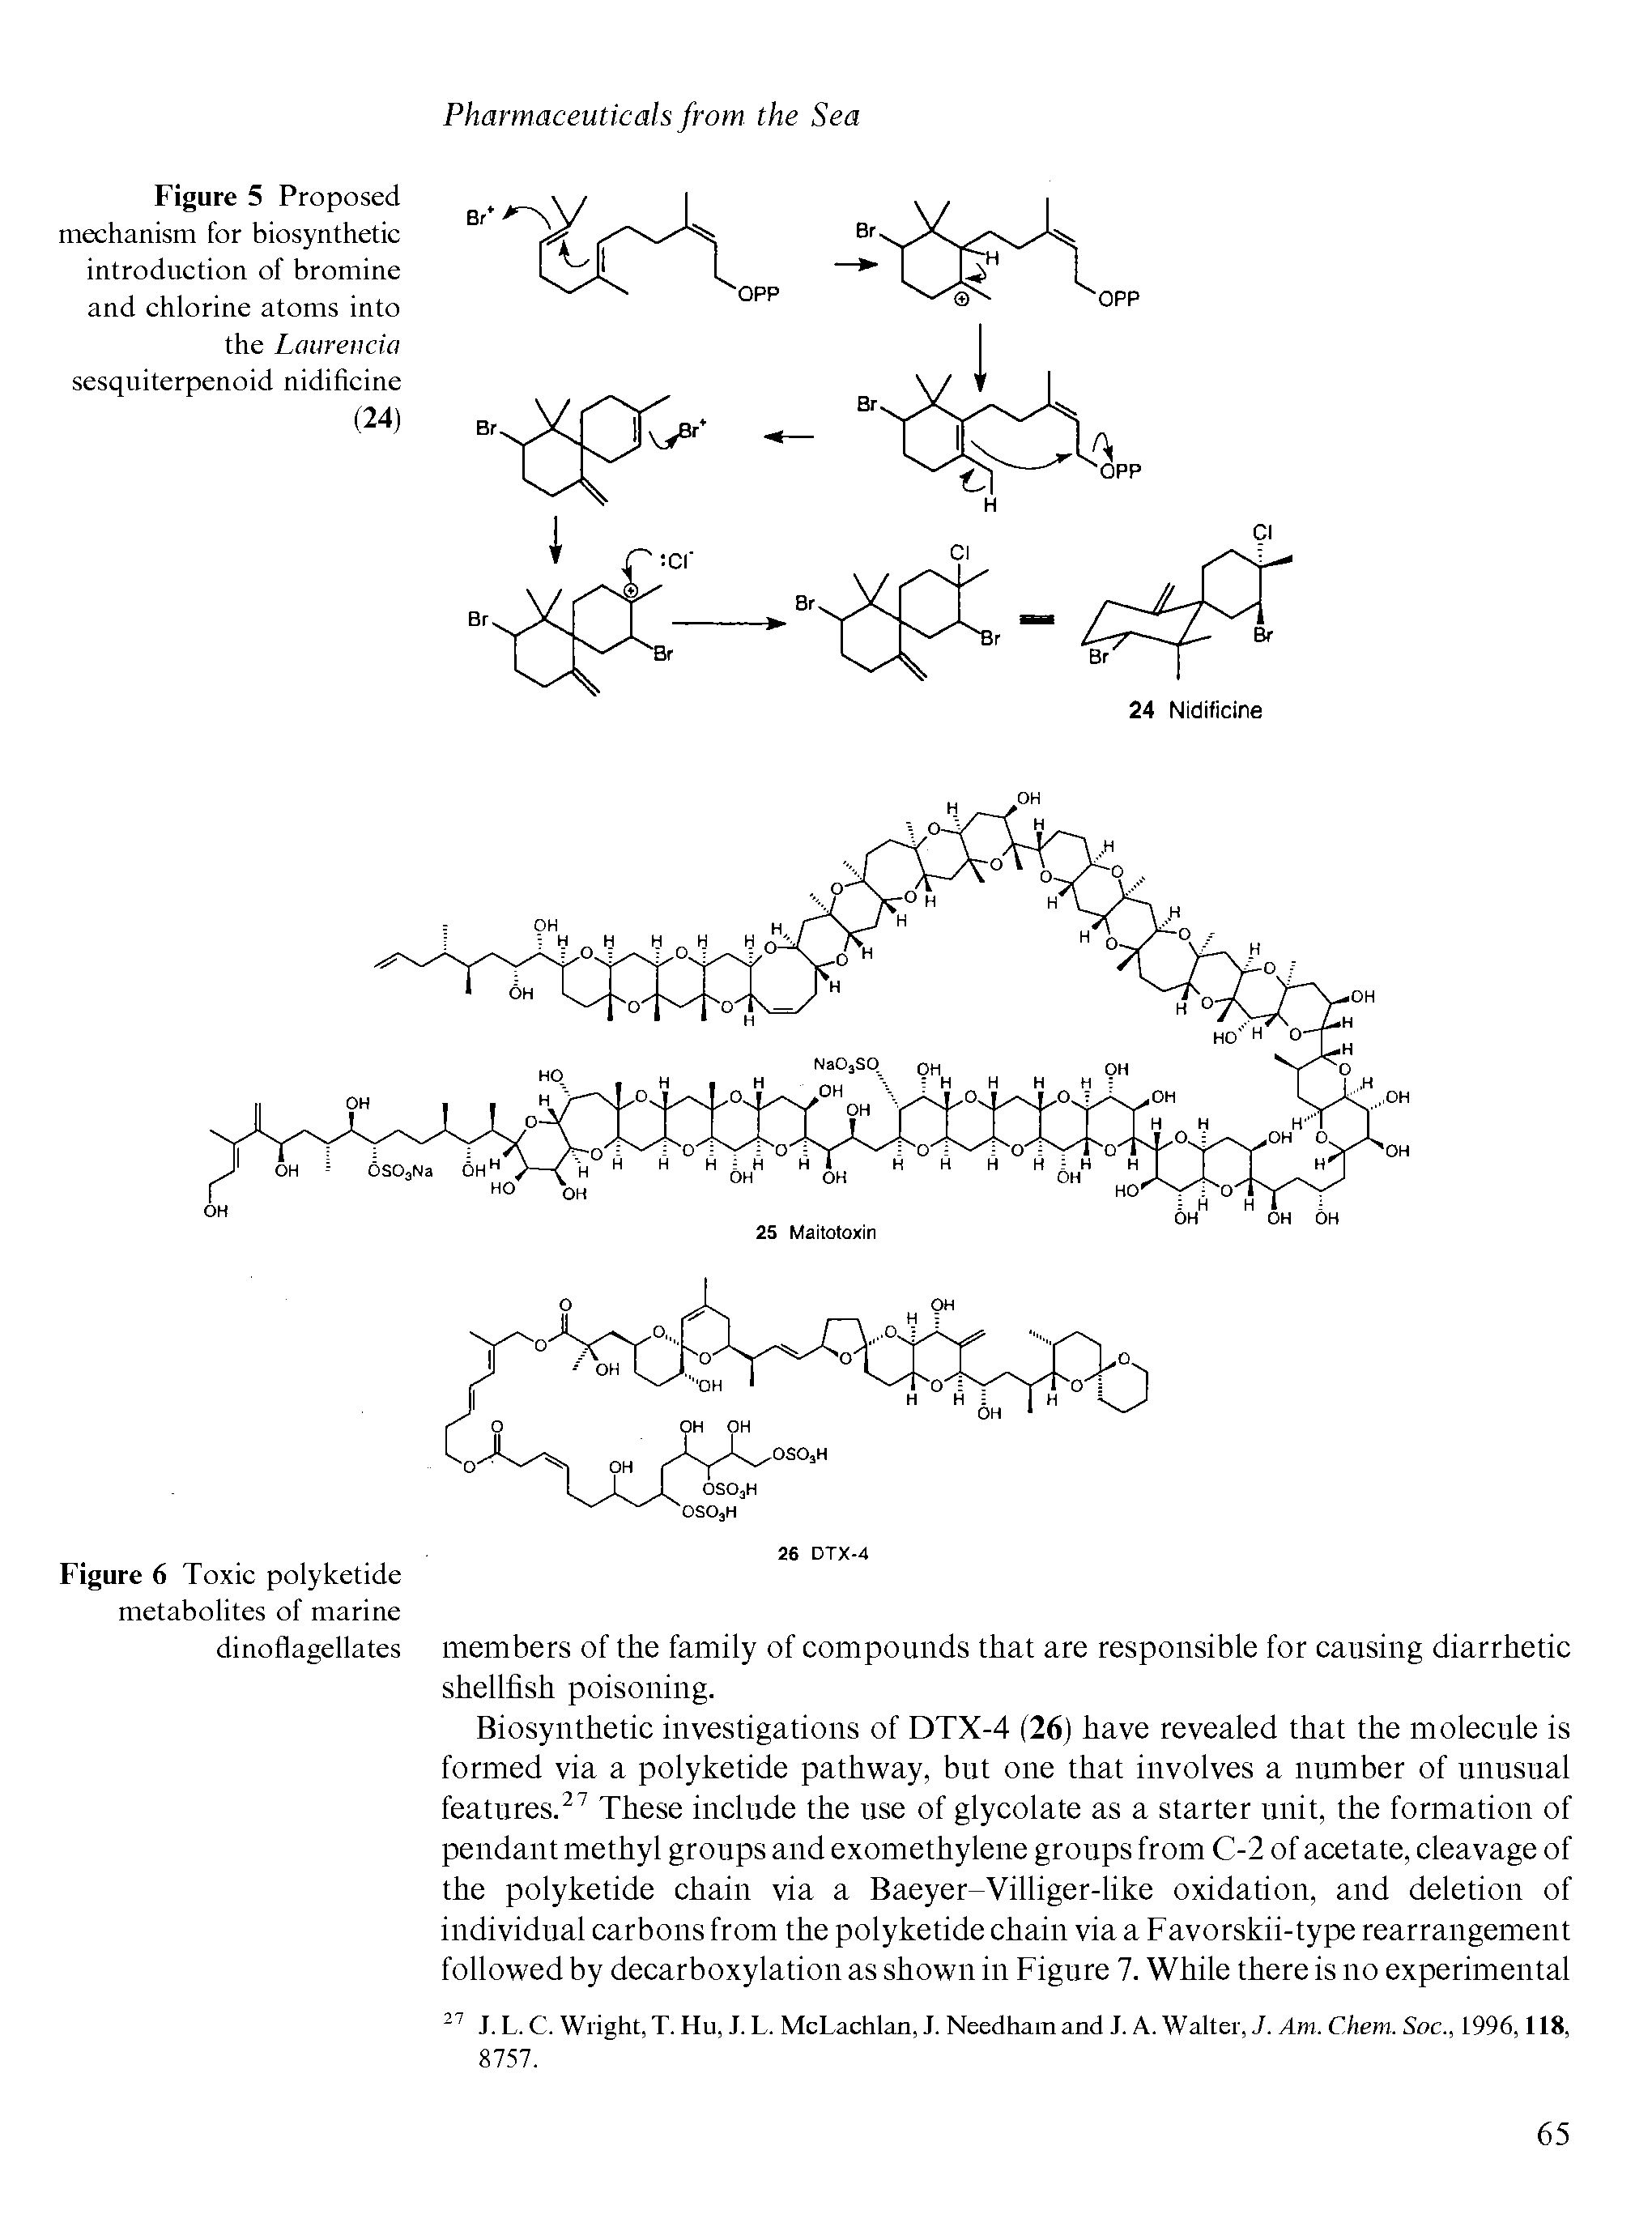 Figure 5 Proposed mechanism for biosynthetie introduetion of bromine and ehlorine atoms into the Lcmrencia sesquiterpenoid nidifieine (24)...